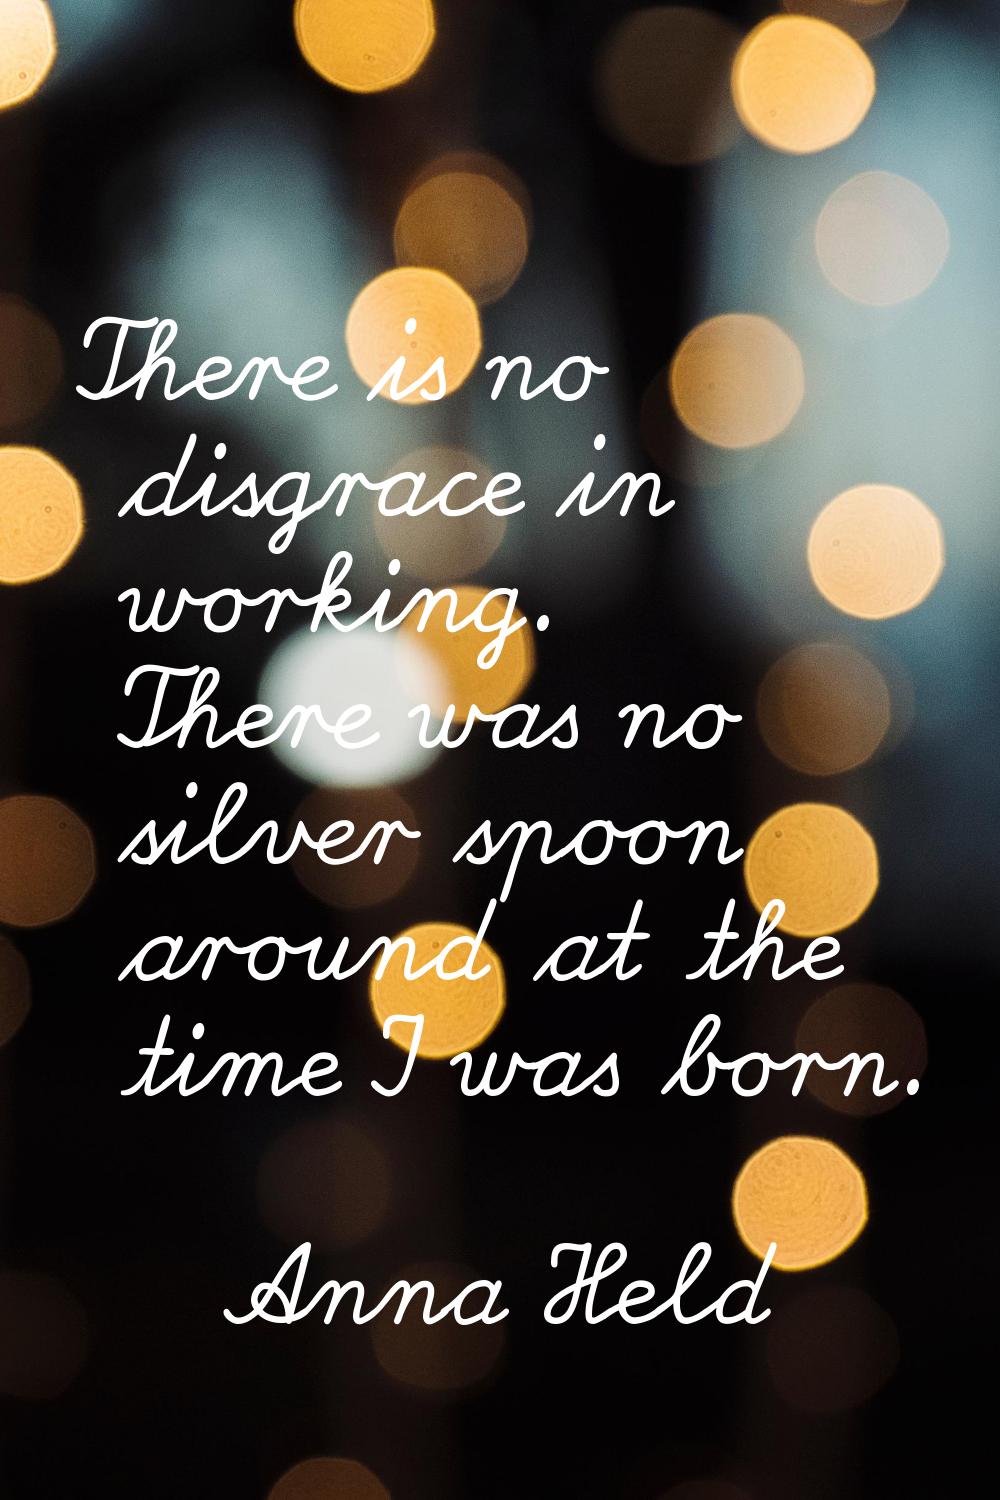 There is no disgrace in working. There was no silver spoon around at the time I was born.